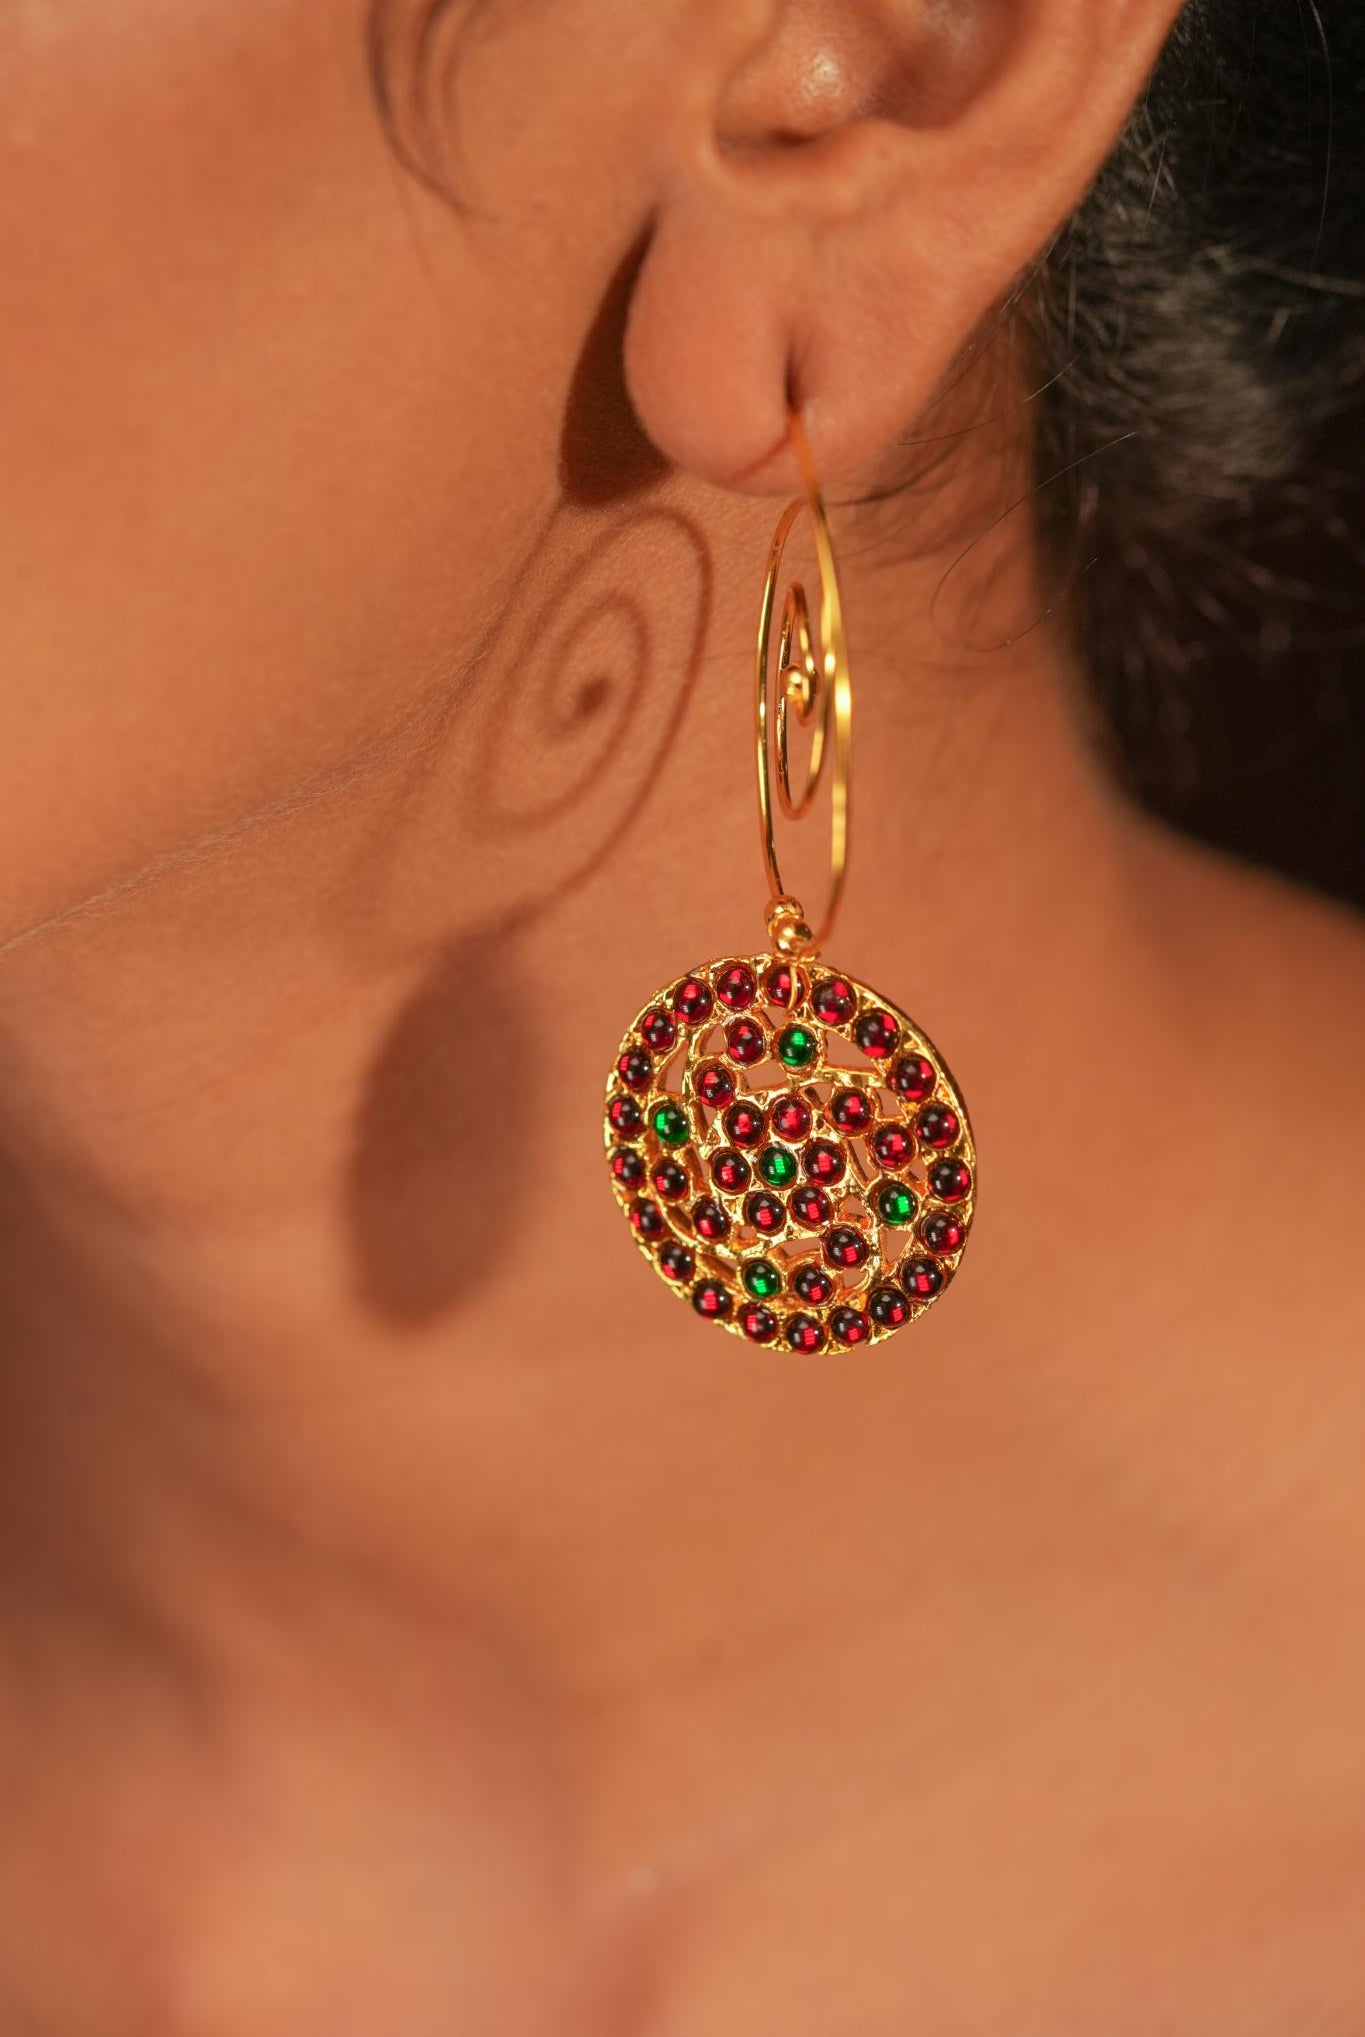 Contemporary Earring with Spiral Hook and Round Motif - CiceroniEarringsAarika